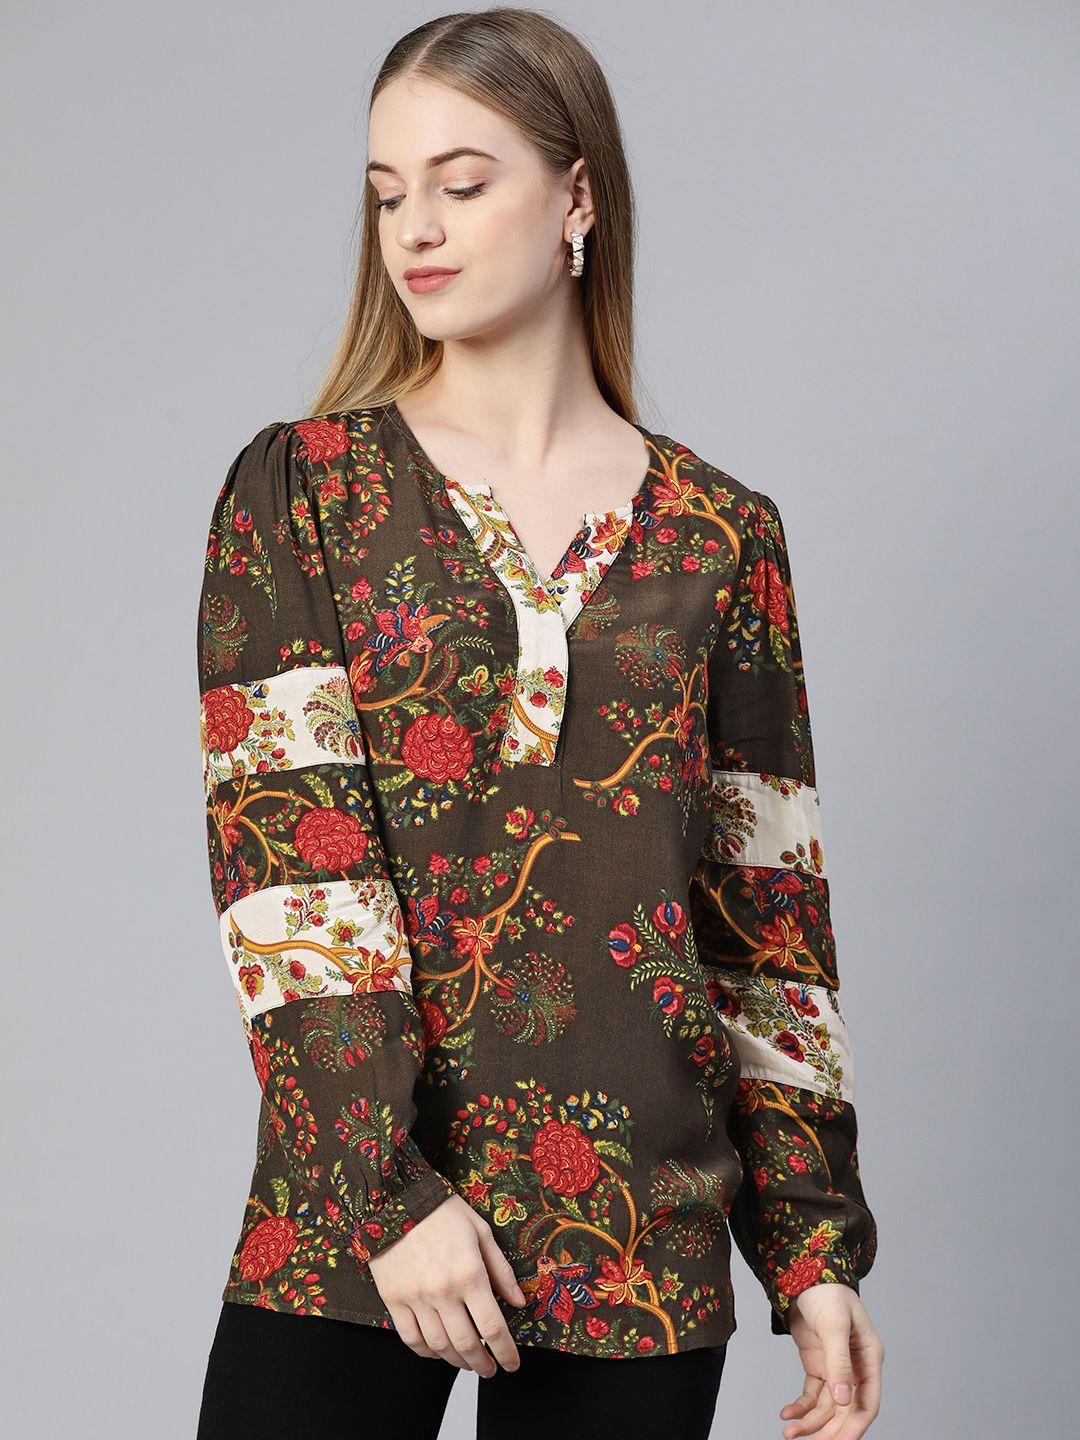 marks & spencer coffee brown & red floral print top